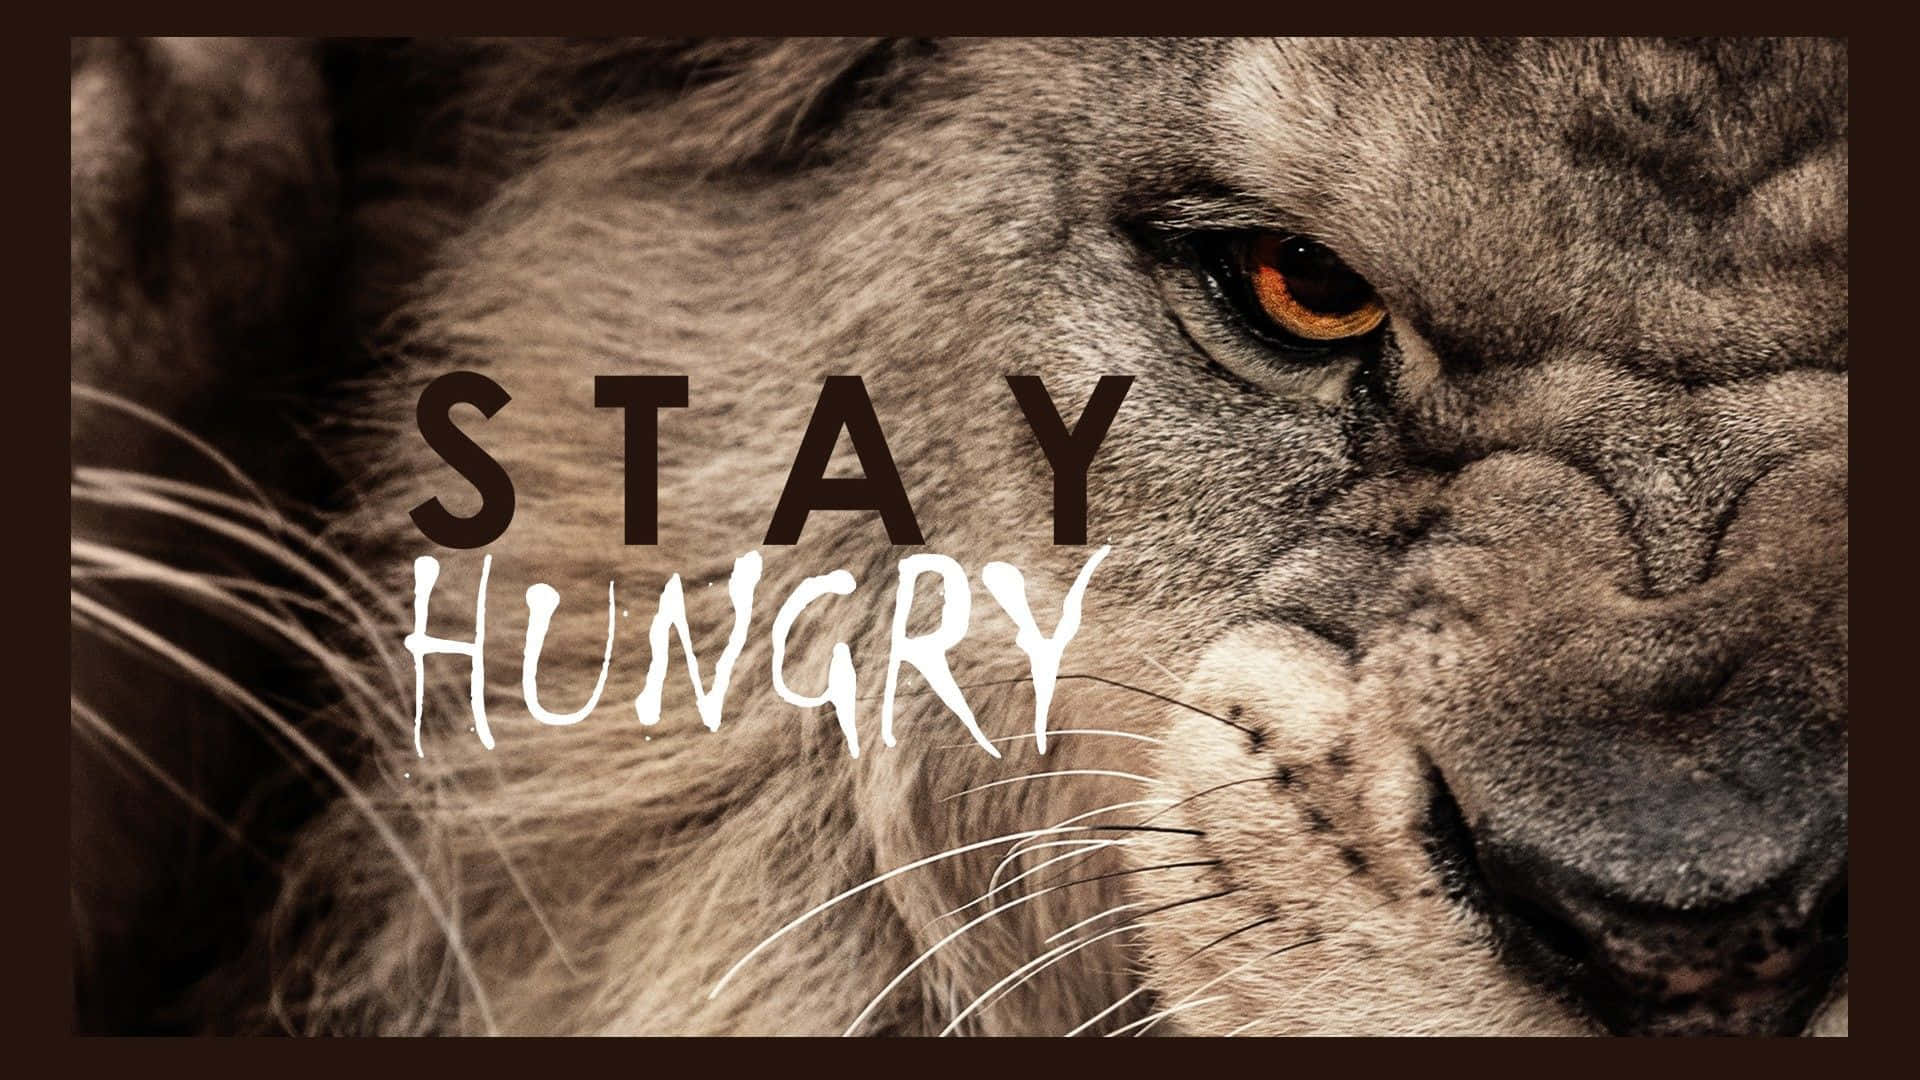 Image  “Life is full of challenges, so put on your brave face and face them like a lion.” Wallpaper